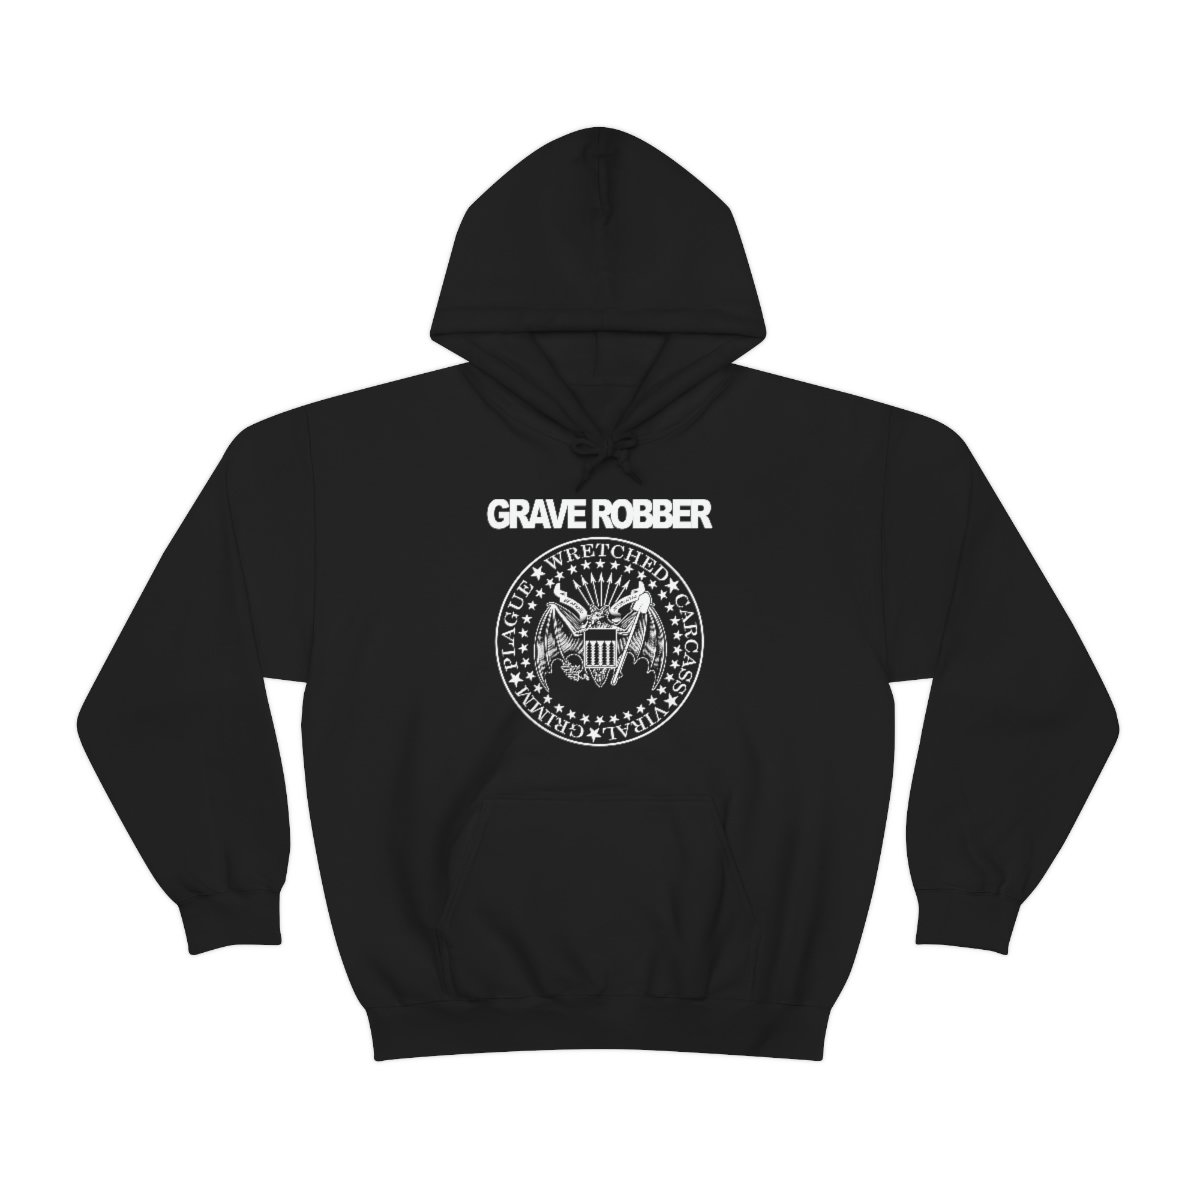 Grave Robber Hey Ho Let’s Whoa Pullover Hooded Sweatshirt